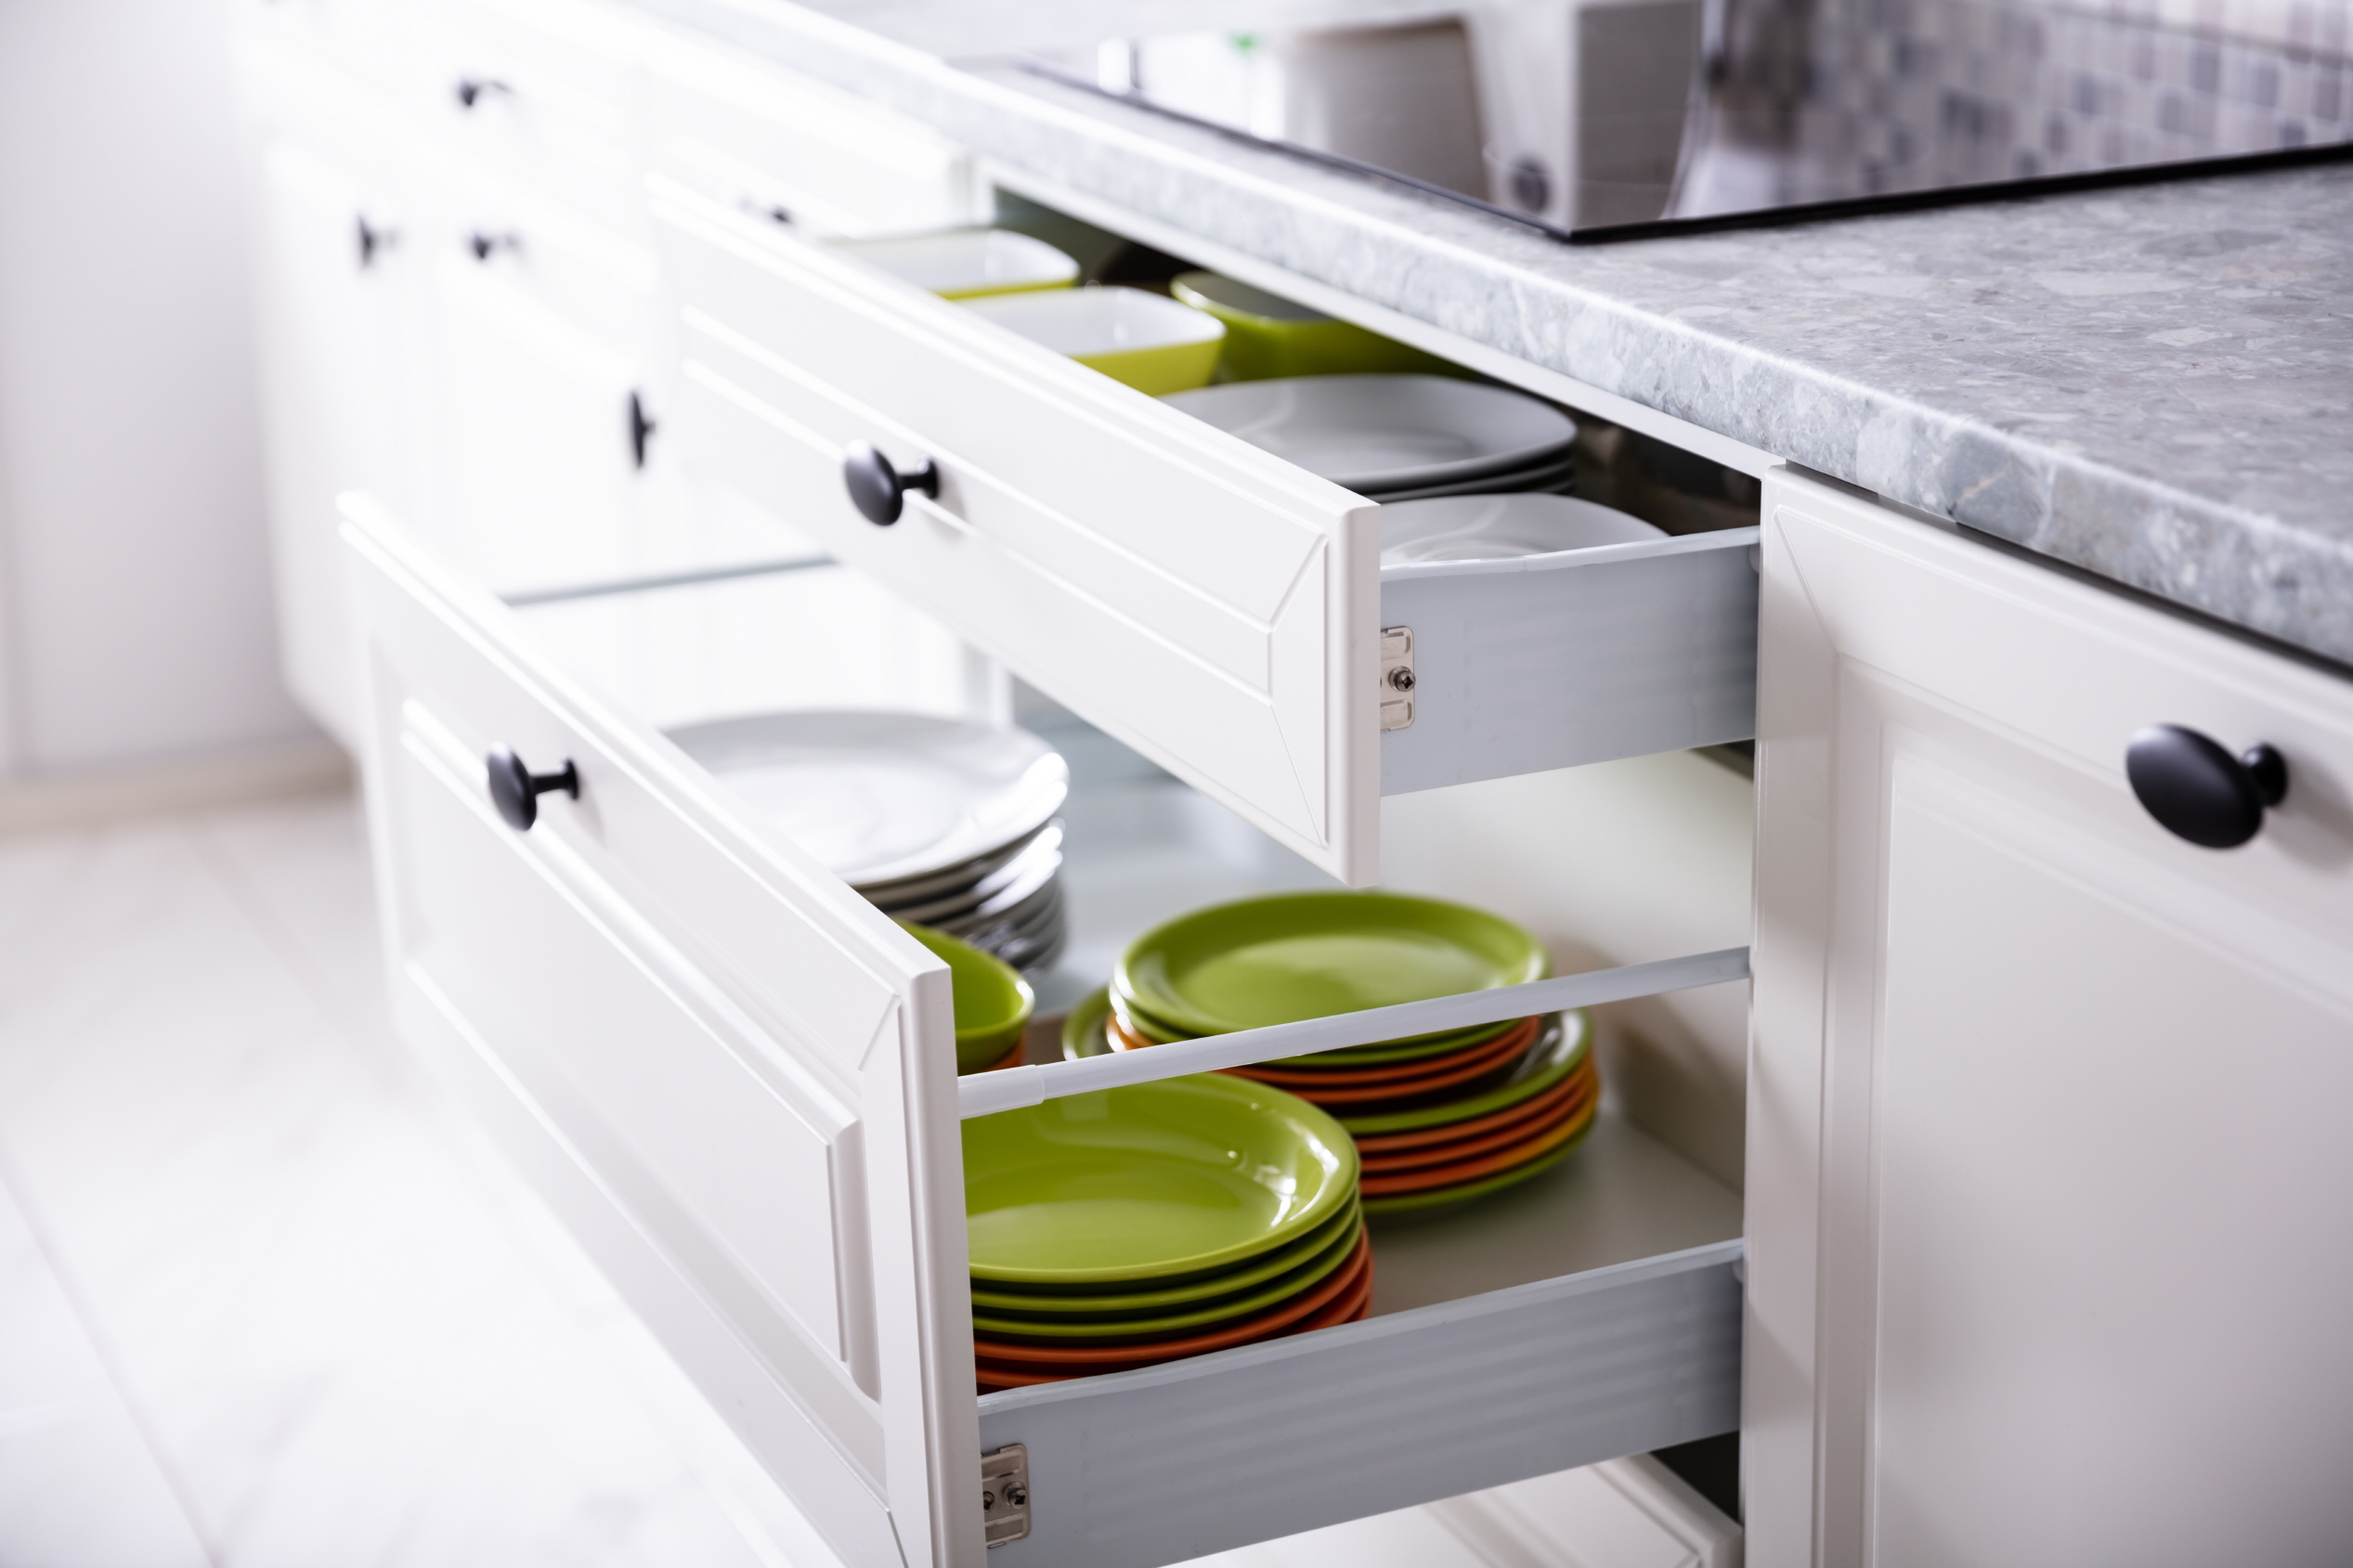 Drawer Liners are the ultimate organizational tools, protecting your utensils and ensuring everything is stored in its proper place.